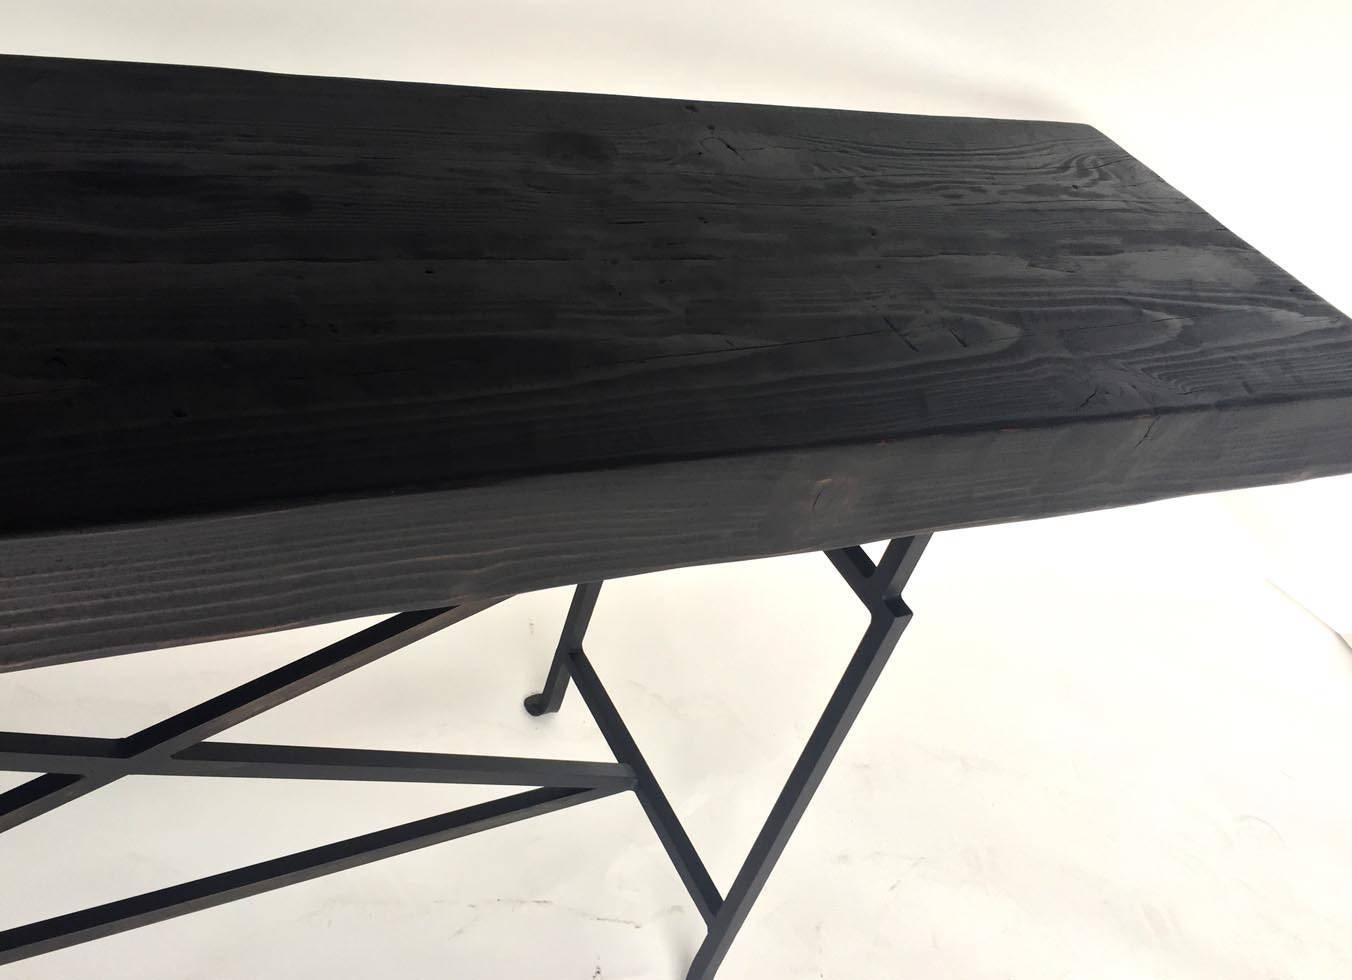 Custom douglas fir beam console with custom hand-forged iron base. Can be made custom in different style base and in a variety of finishes. Shown here in an open grain ebony finish. Made in Los Angeles by Dos Gallos Studio.
PRICES ARE SUBJECT TO